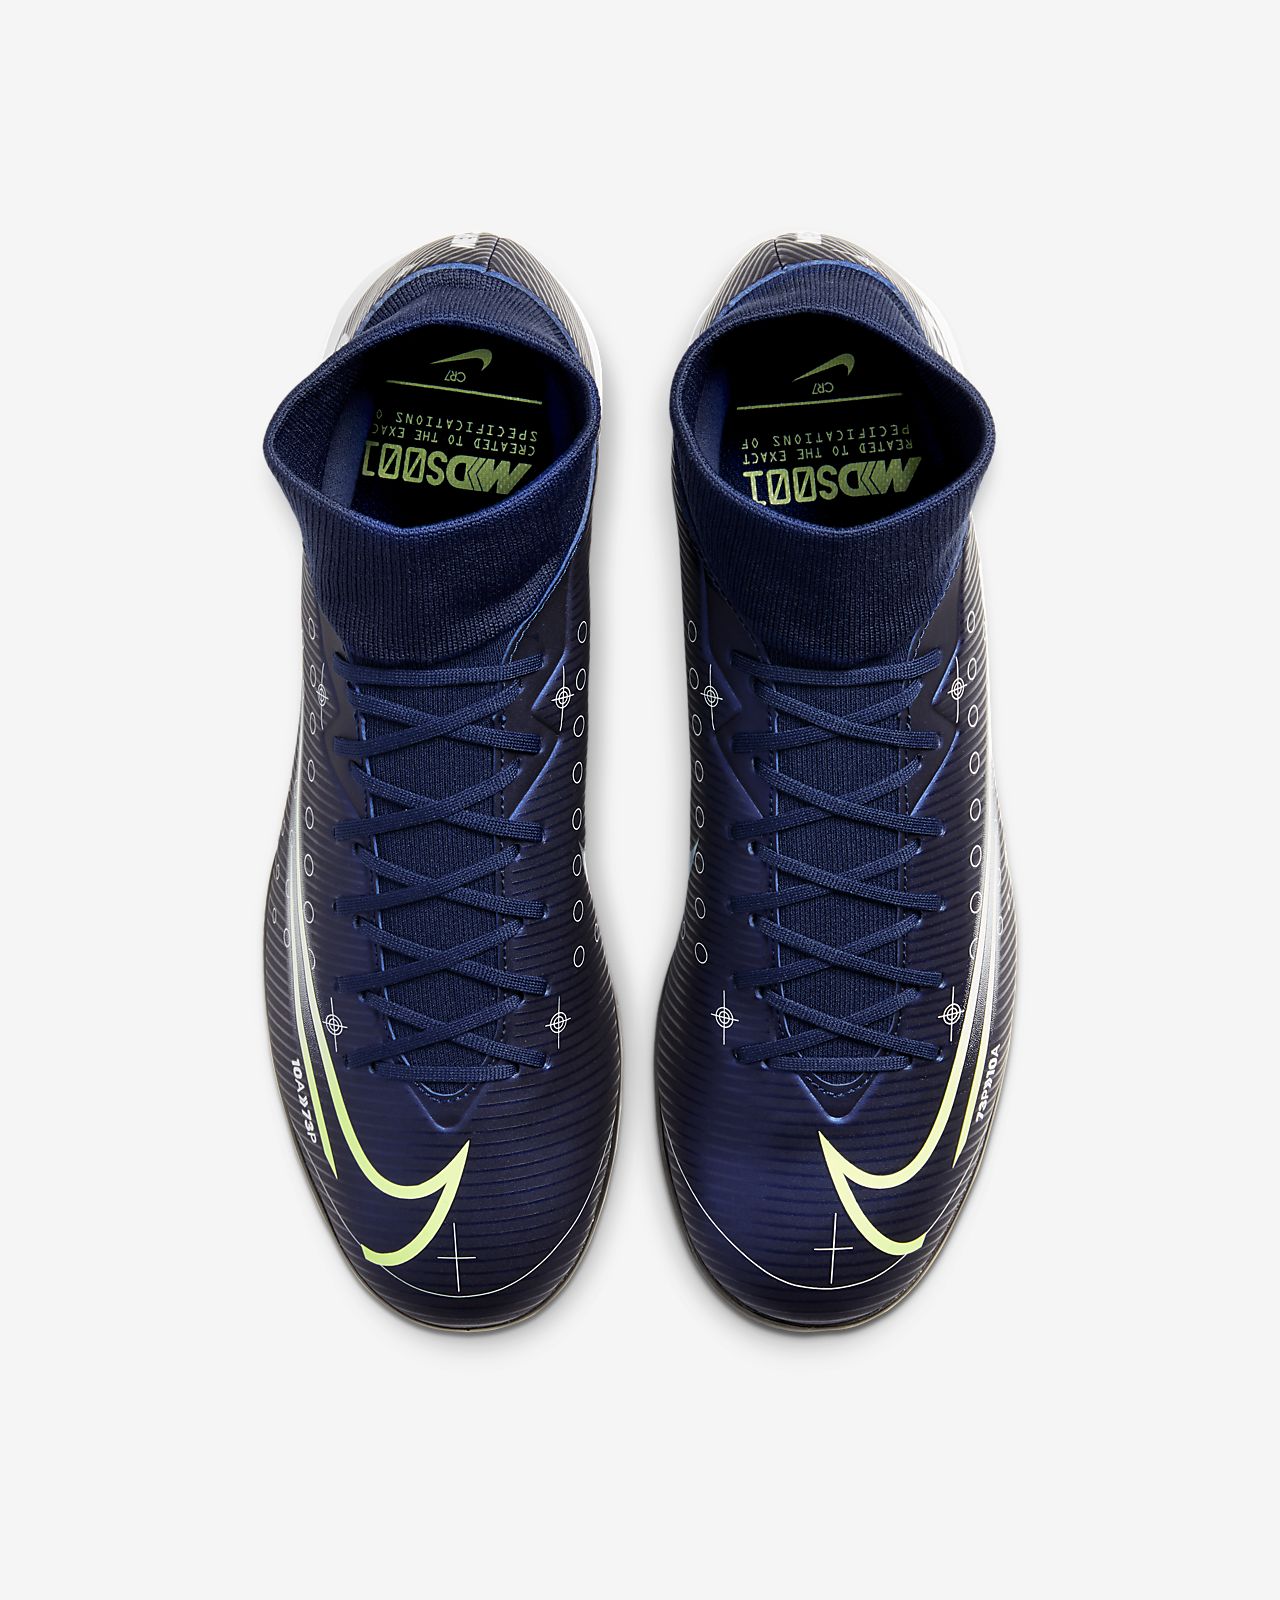 Nike Mercurial Superfly VI Academy GS TF for kids Boots.